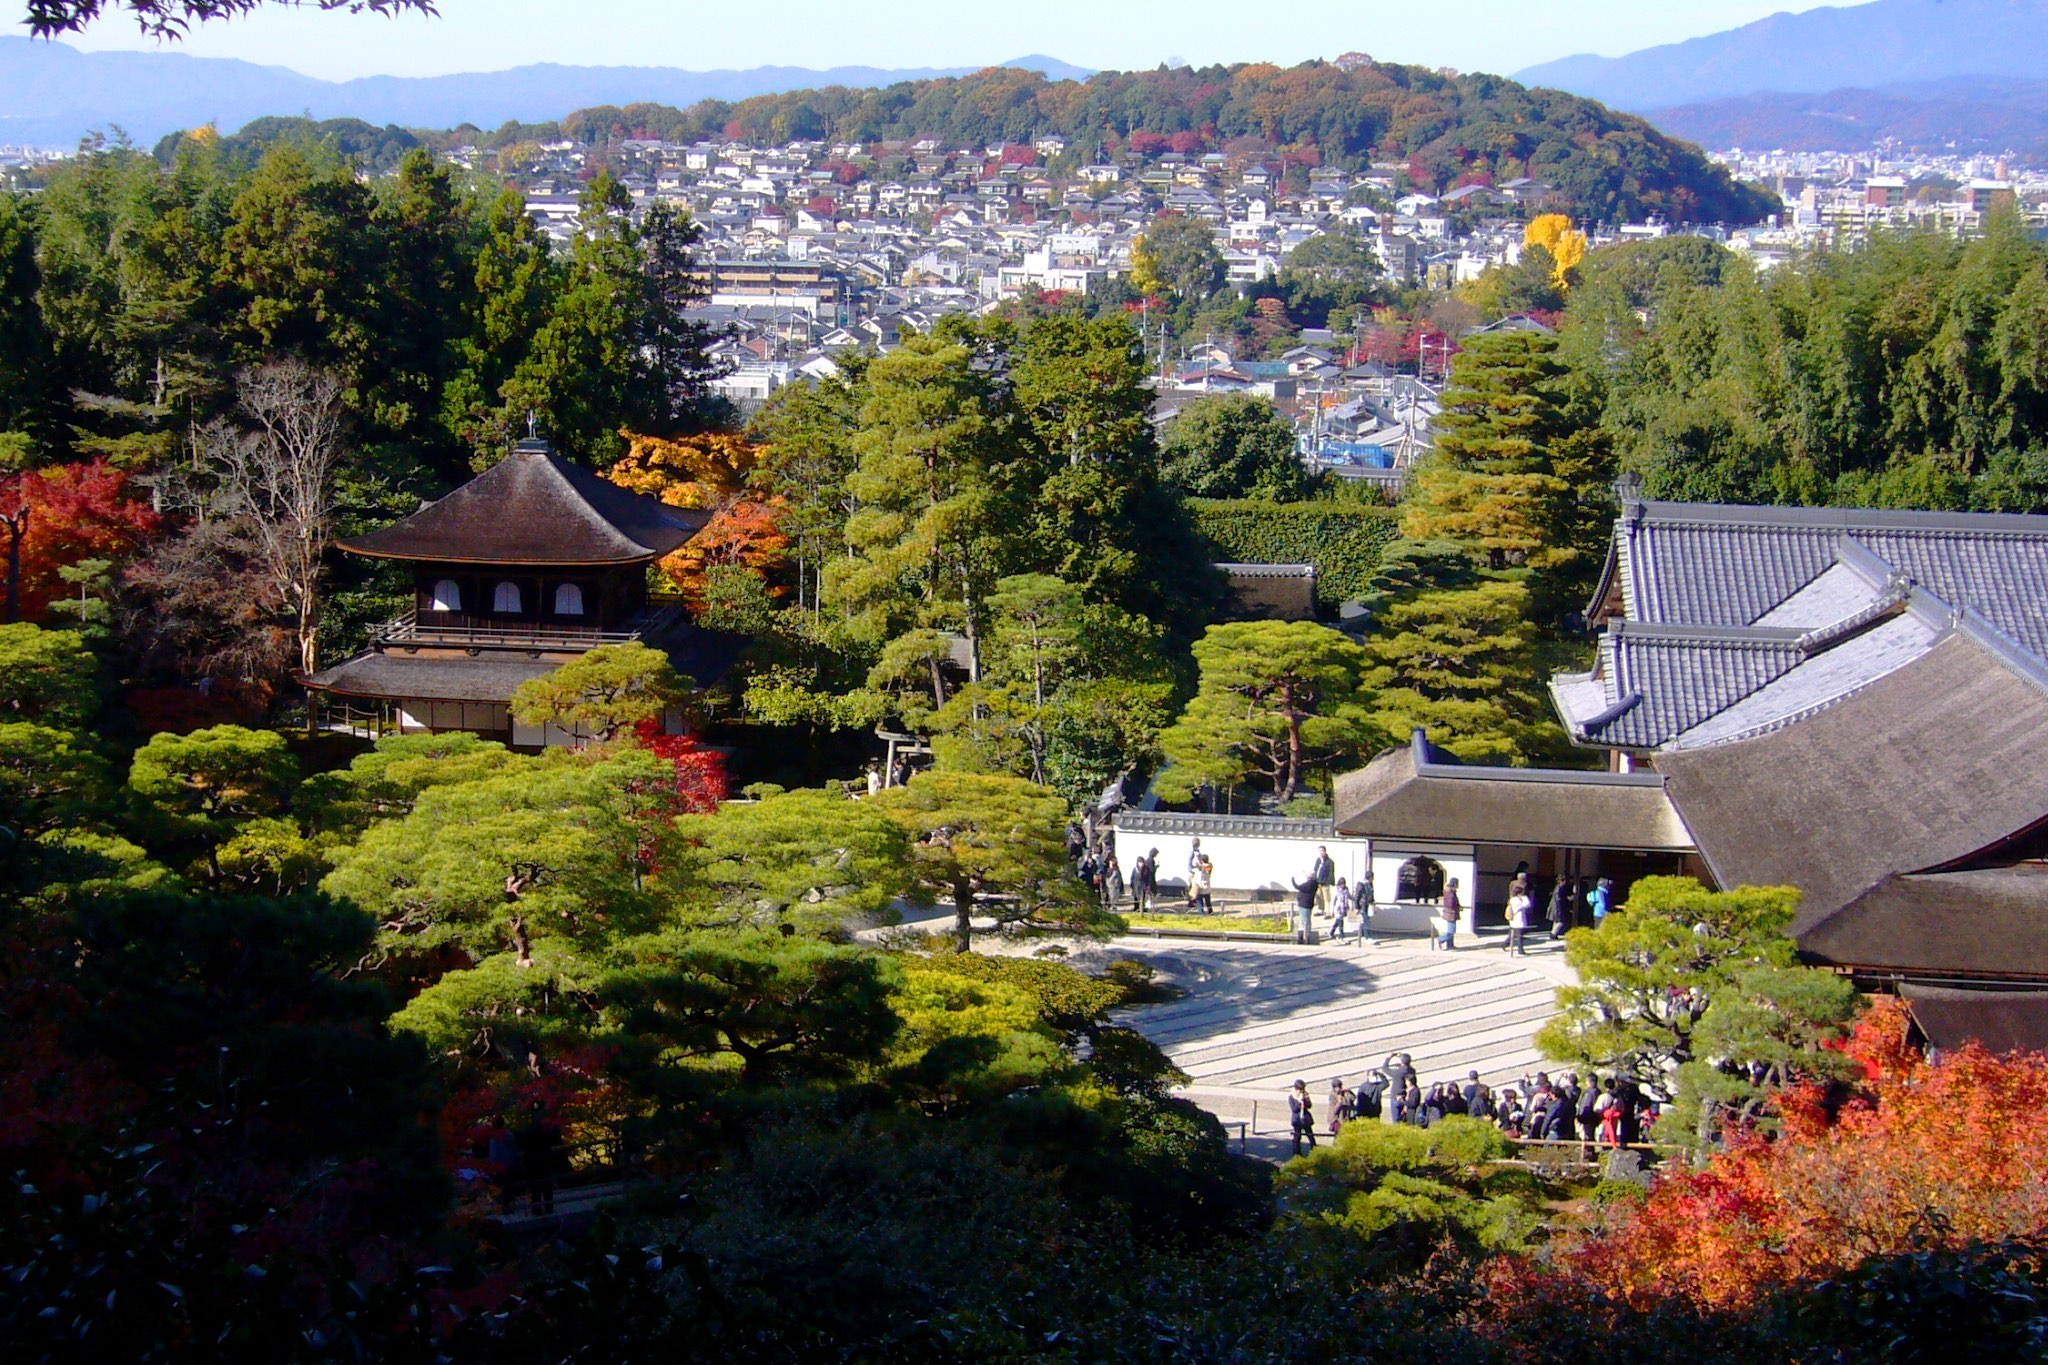 Ginkaku-ji as seen from view point behind the temple. Credit: Tetsuhiro Terada. Licensed under CC.